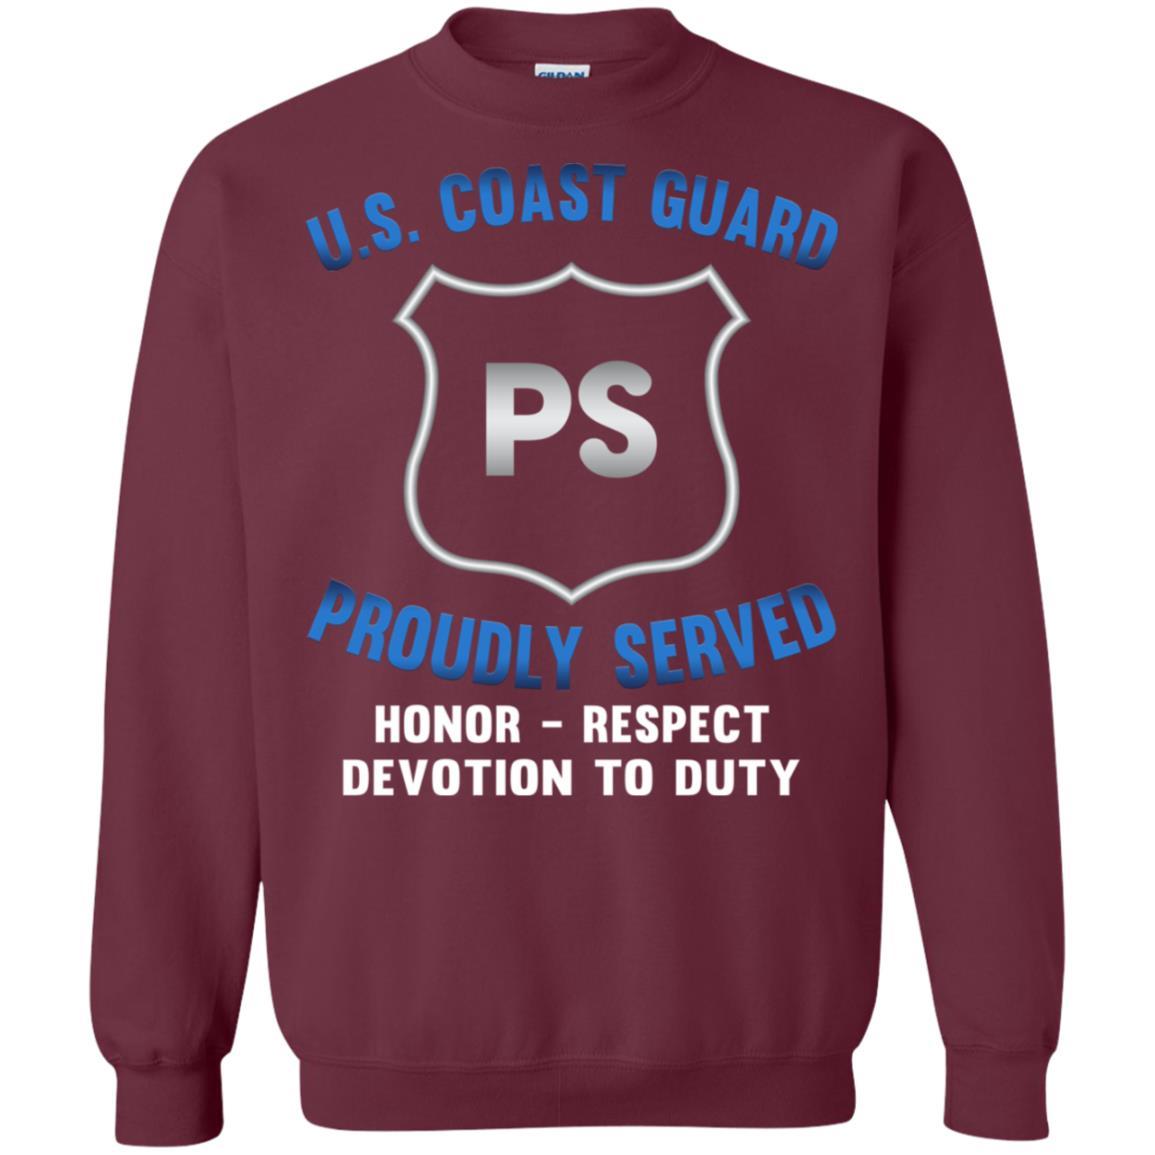 USCG PORT SECURITY SPECIALIST PS Logo Proudly Served T-Shirt For Men On Front-TShirt-USCG-Veterans Nation